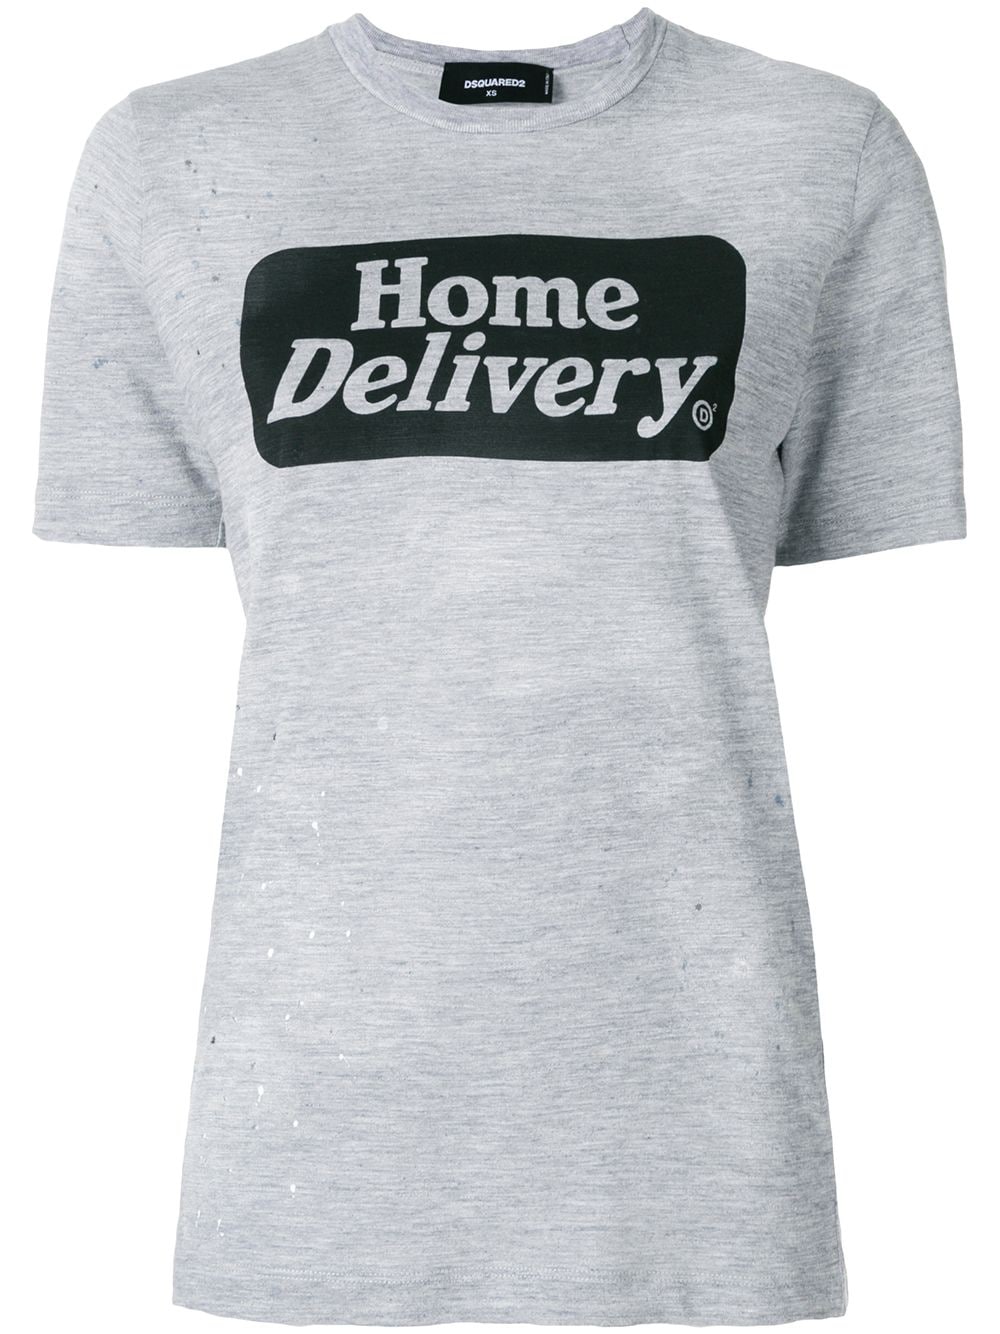 Dsquared2 Home Delivery T-shirt от Dsquared2